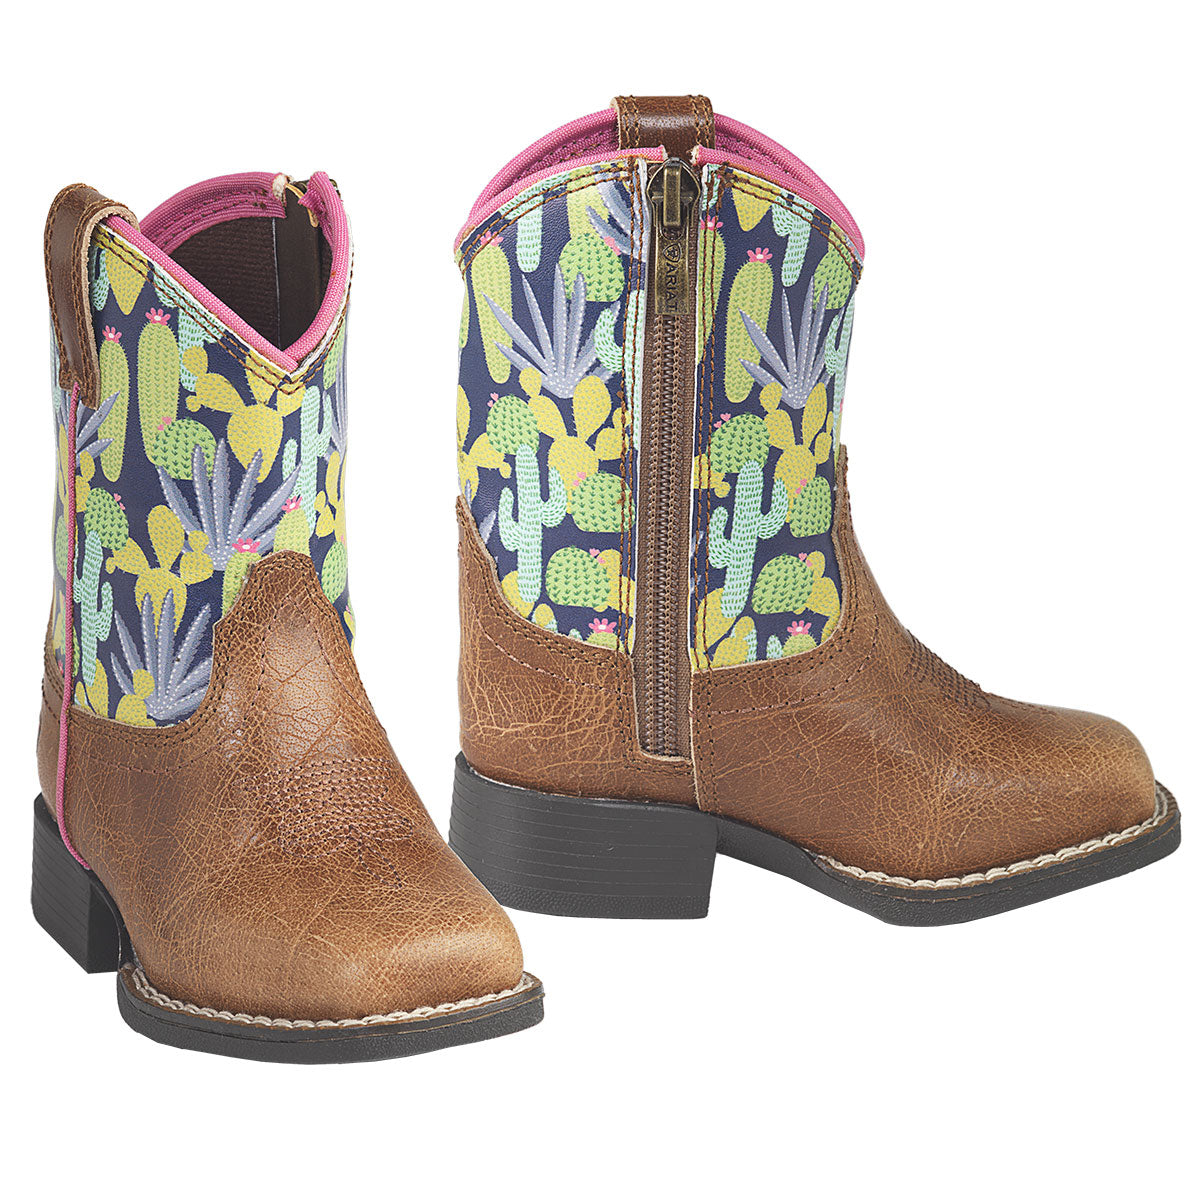 ARIAT LIL'STOMPERS "ROSWELL" TODDLER GIRL'S BOOT